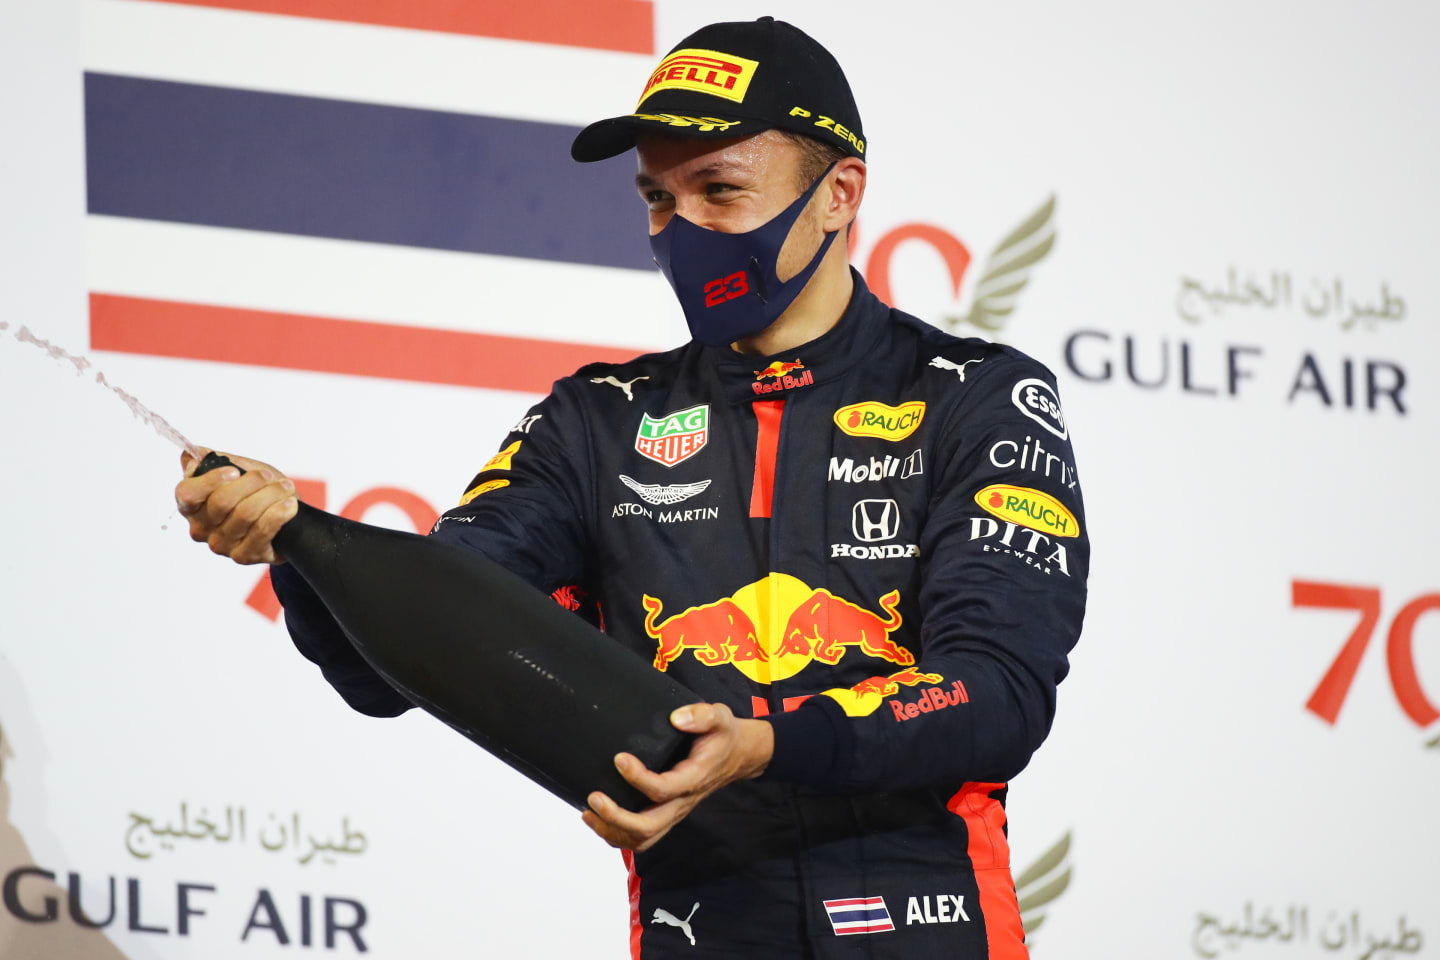 BAHRAIN, BAHRAIN - NOVEMBER 29: Third placed Alexander Albon of Thailand and Red Bull Racing celebrates on the podium during the F1 Grand Prix of Bahrain at Bahrain International Circuit on November 29, 2020 in Bahrain, Bahrain. (Photo by Bryn Lennon/Getty Images)